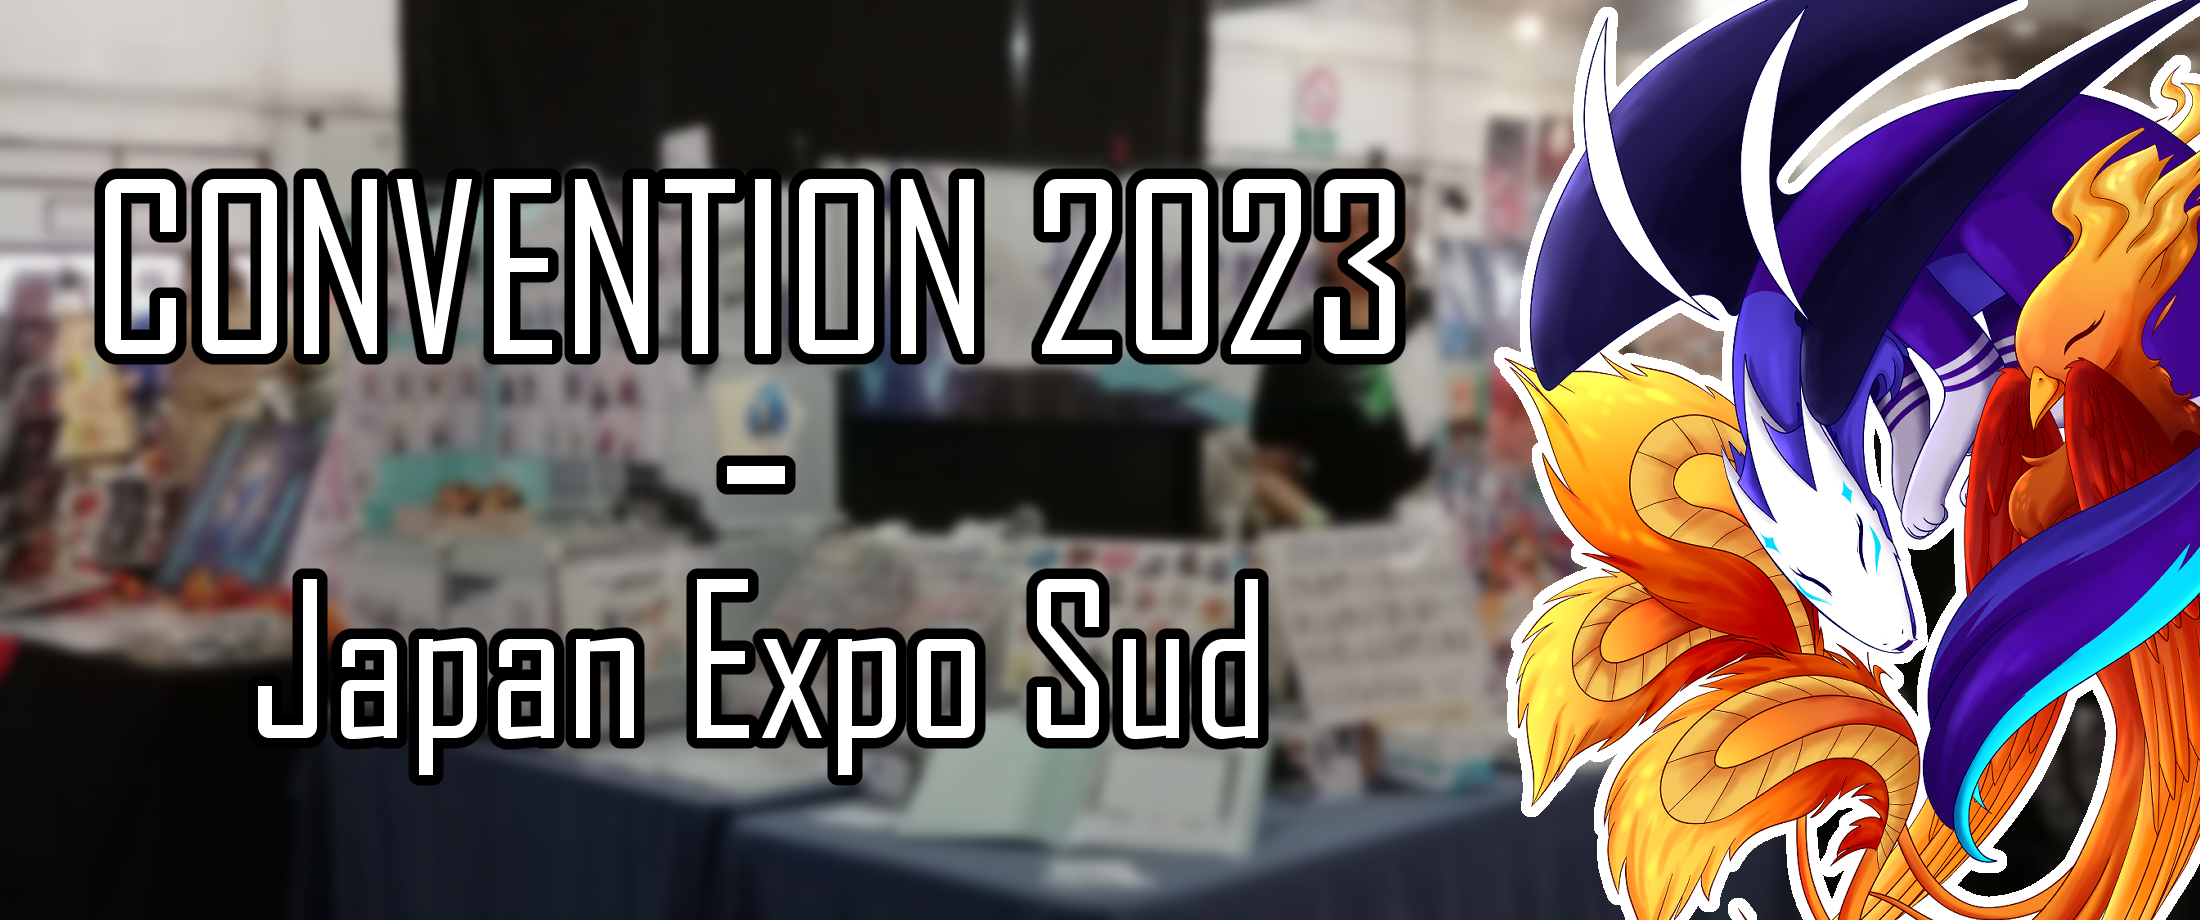 You are currently viewing Japan Expo Sud 2023